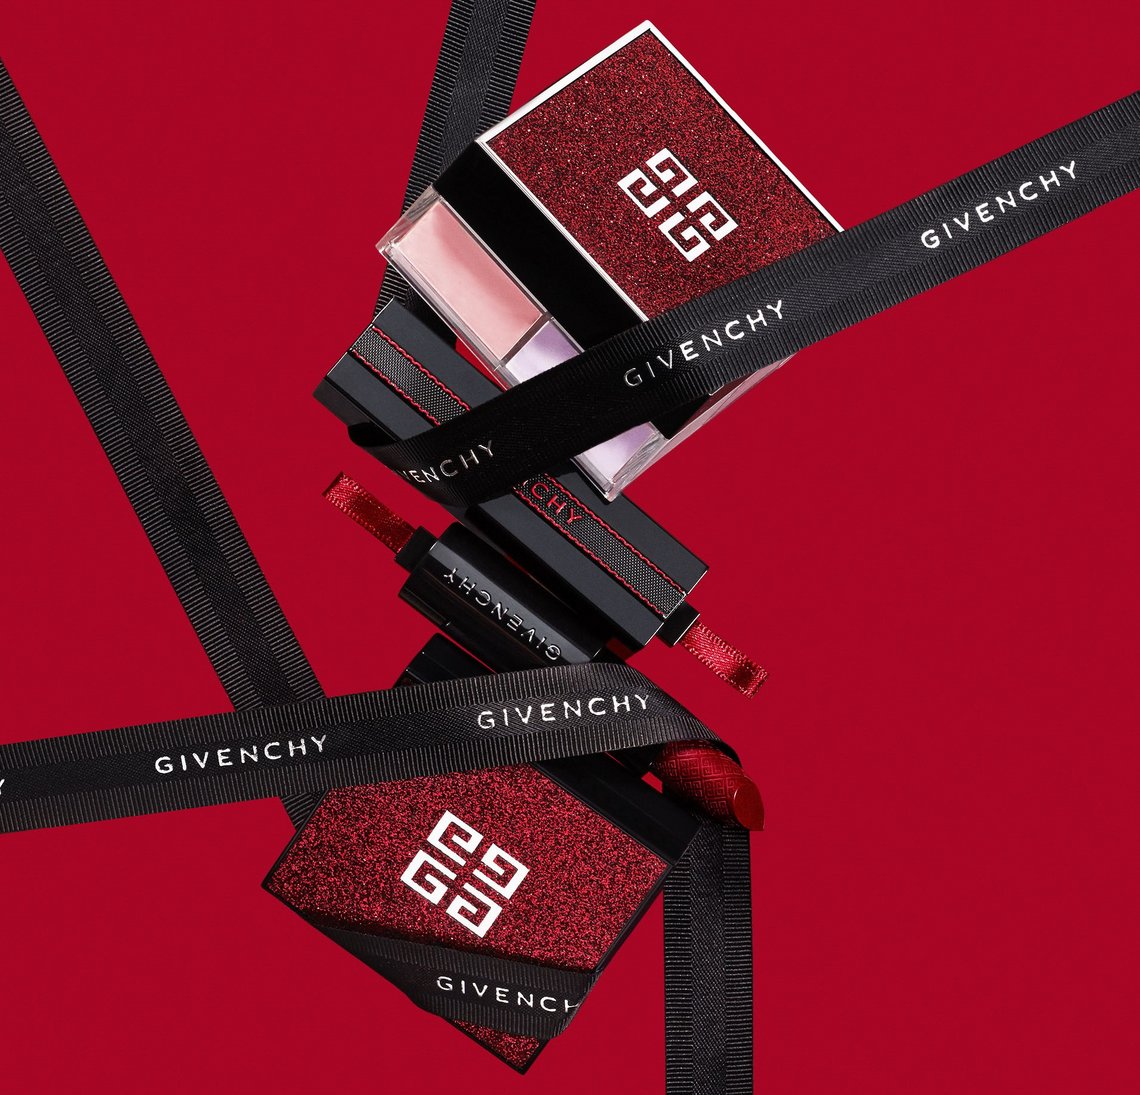 GIVENCHY PUDER UND GIVENCHY LIPPENSTIFT